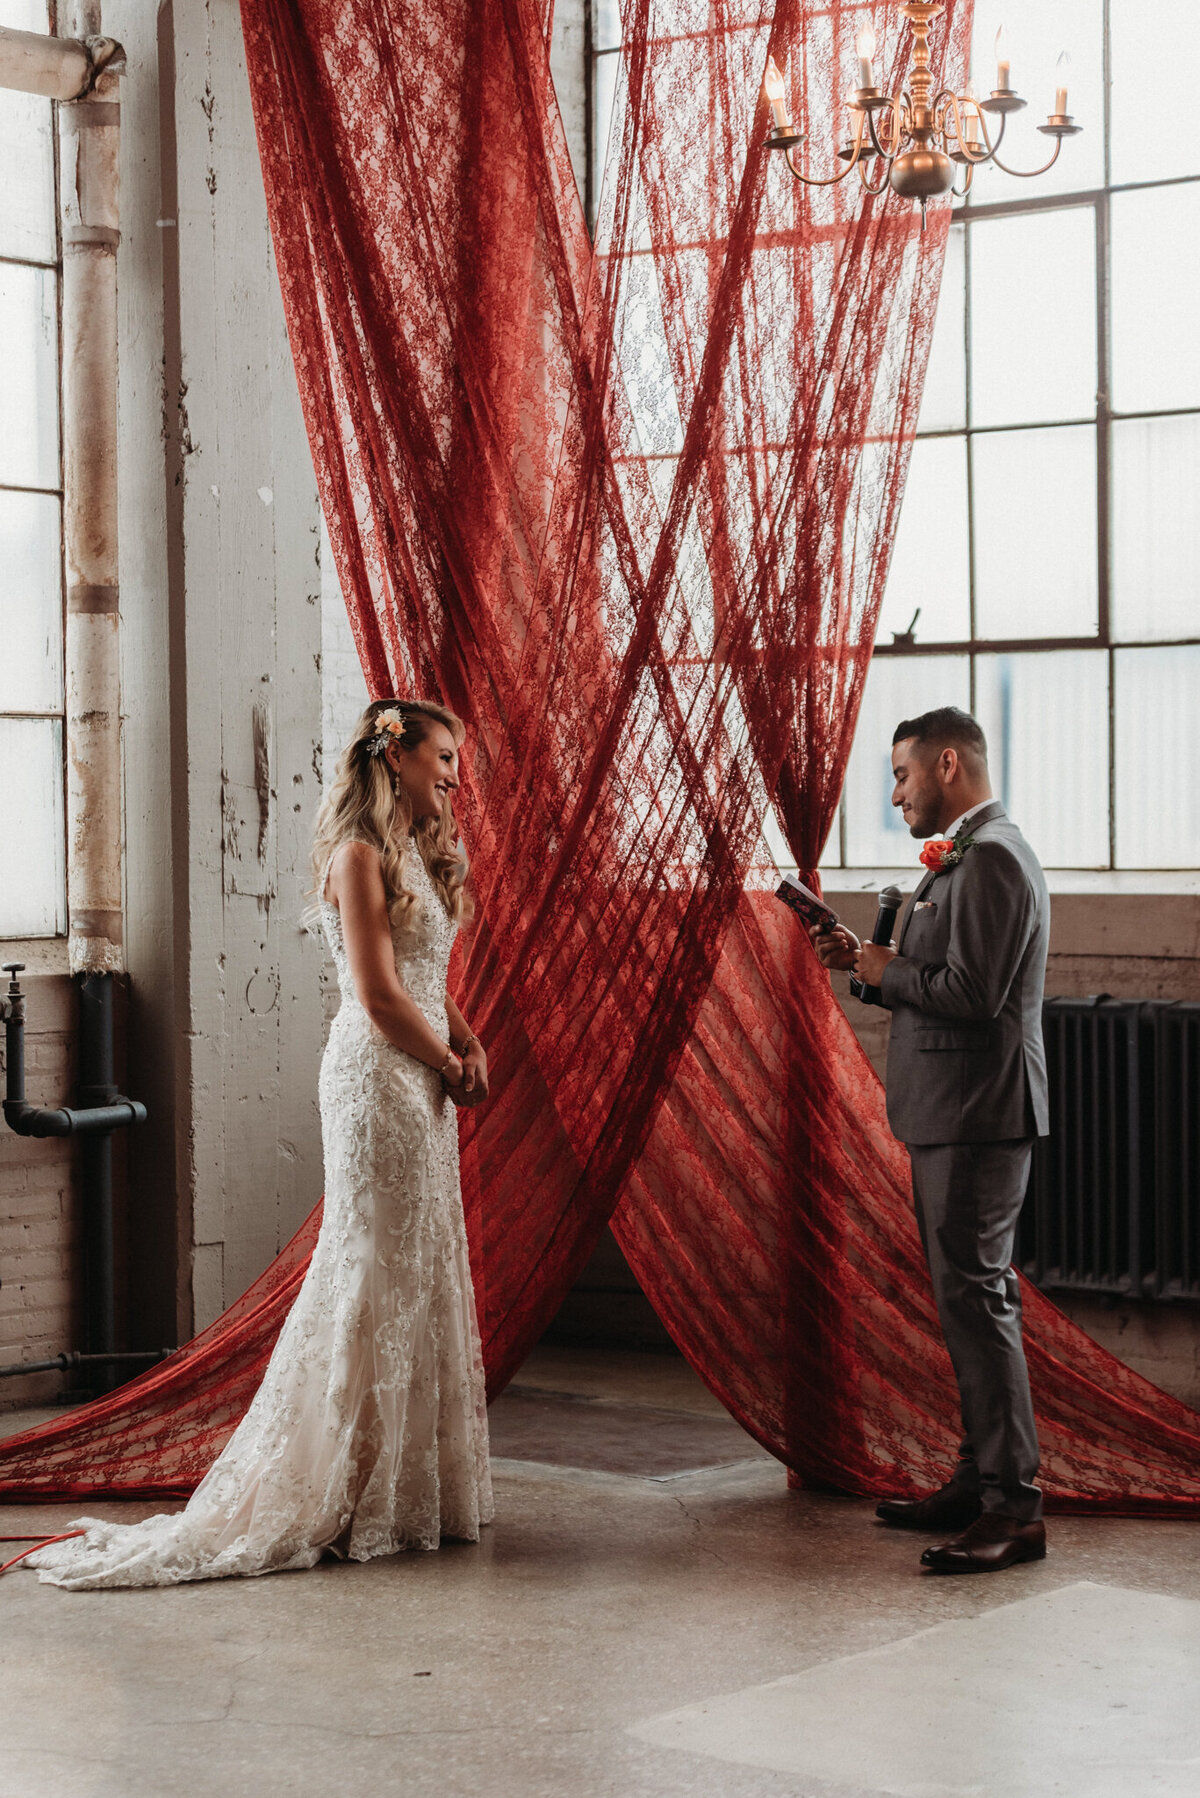 Micro wedding at screw factory cleveland